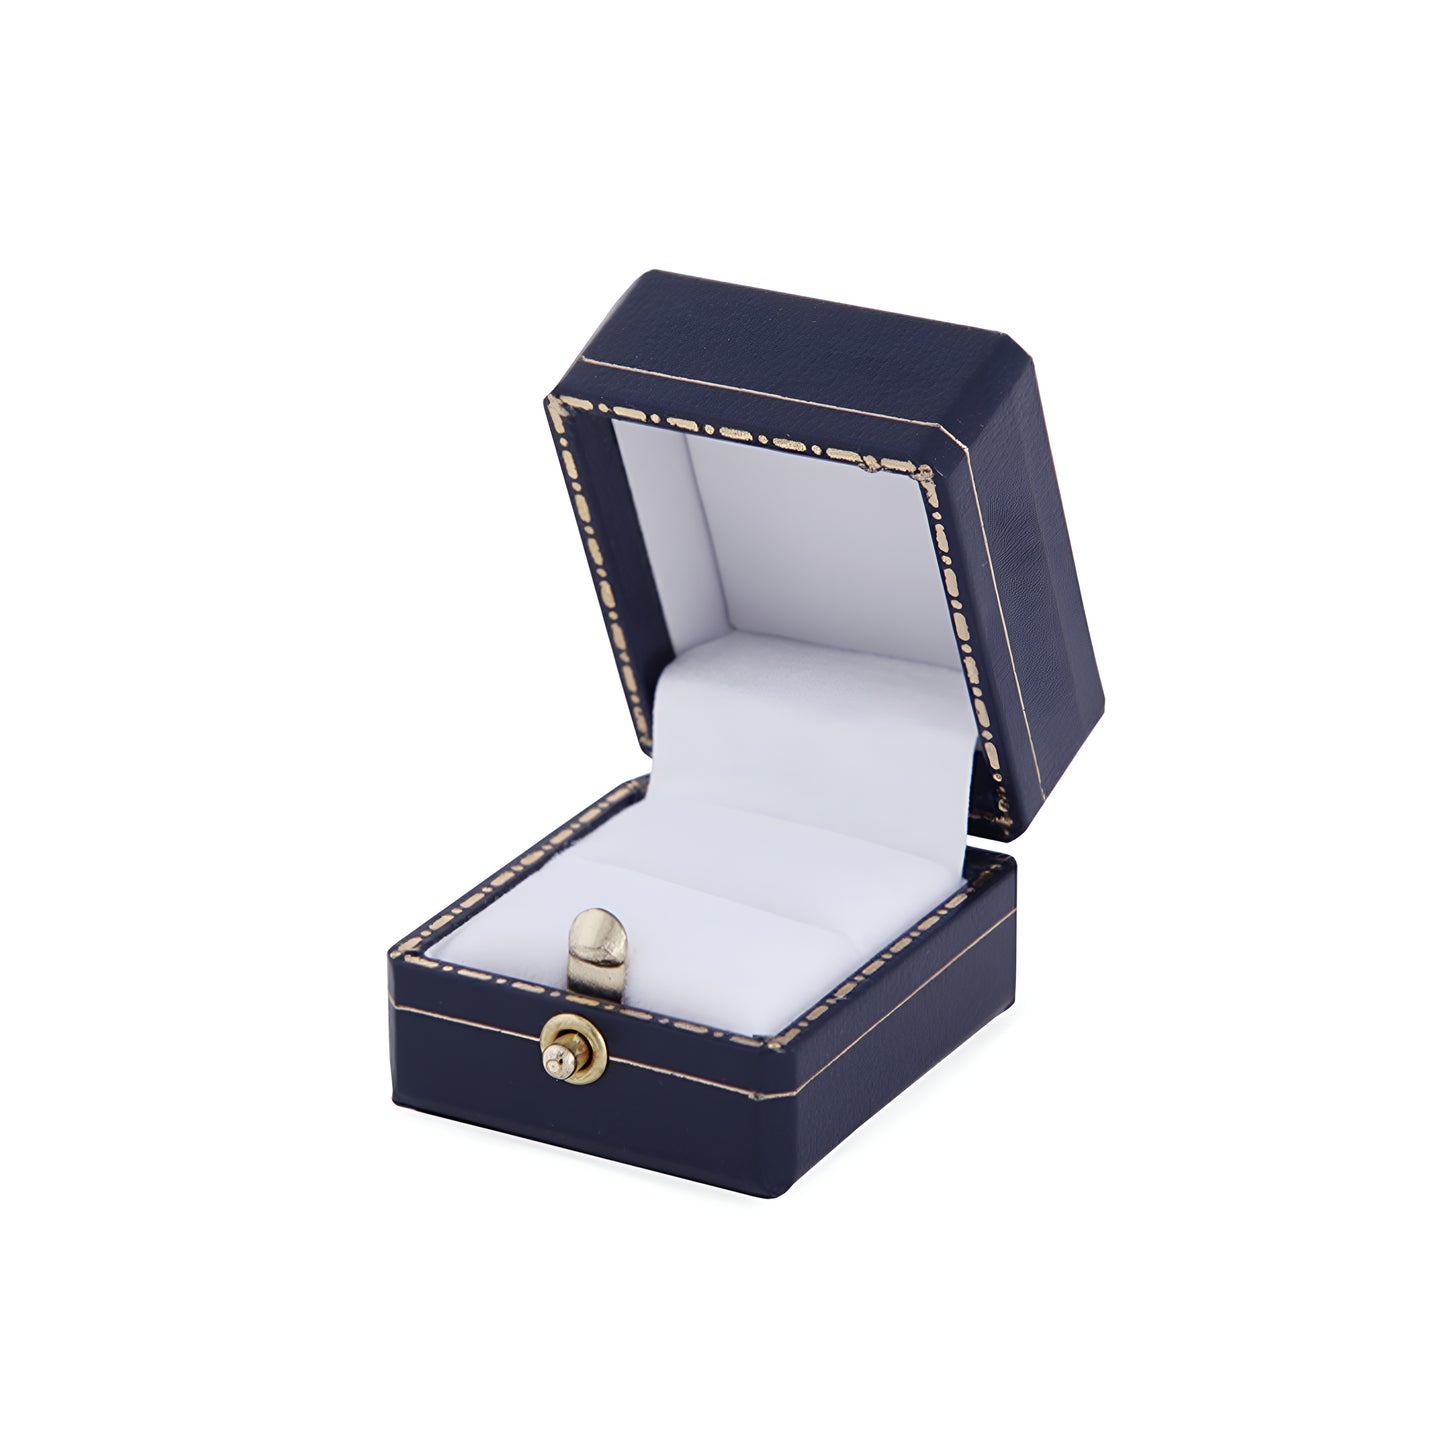 Venice Ring Square Boxes (Pack of 6)